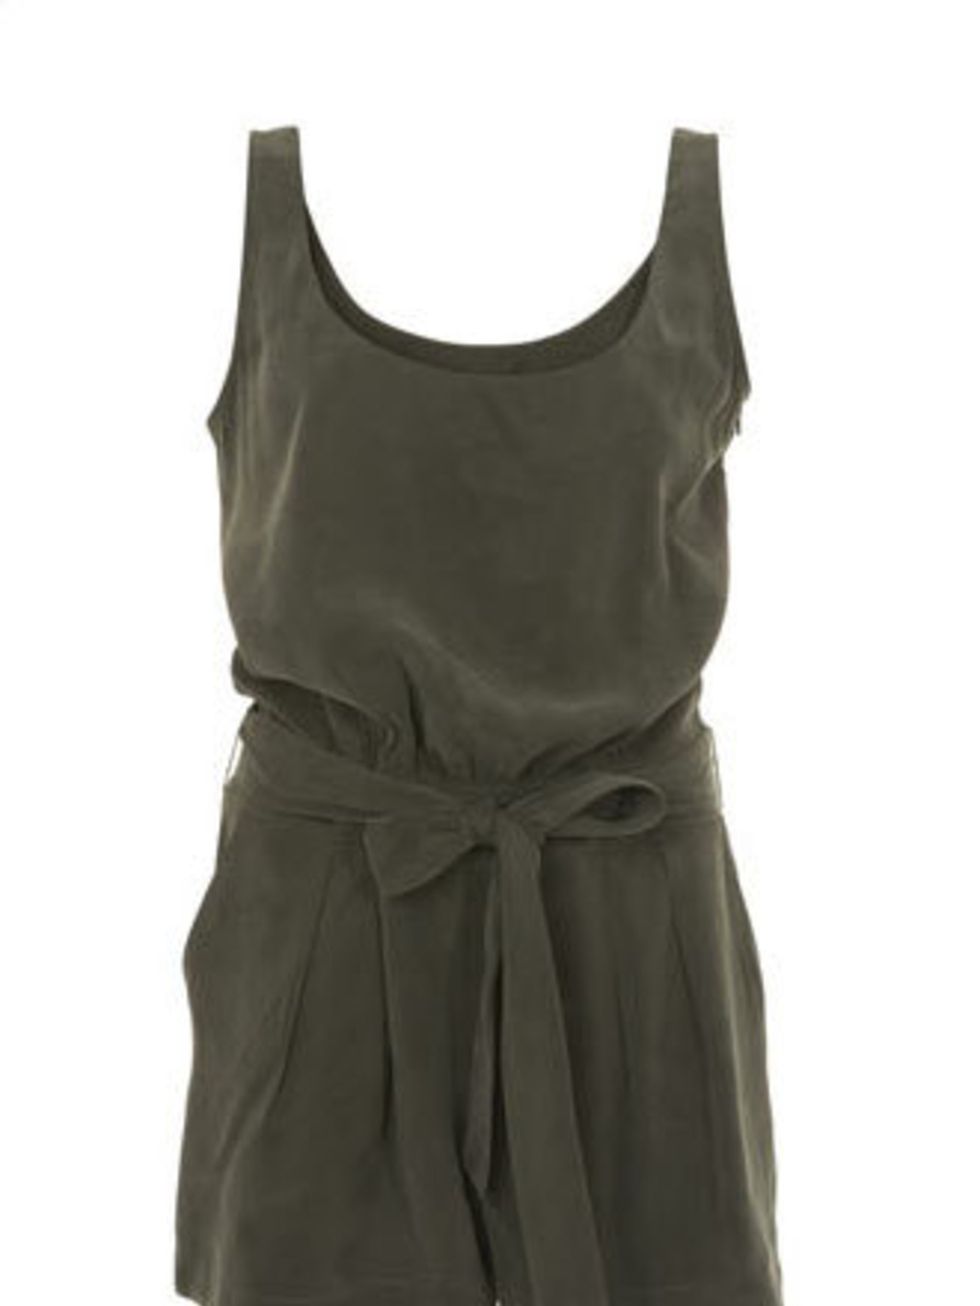 <p>For spring, khaki and tan are hot choices. This playsuit can be paired with Stella McCartney-esque nudes or brightened up with pops of colourful accessories.</p><p>Playsuit, £50 by <a href="http://www.warehouse.co.uk/fcp/product/fashion//VEST-PLAYSUIT/